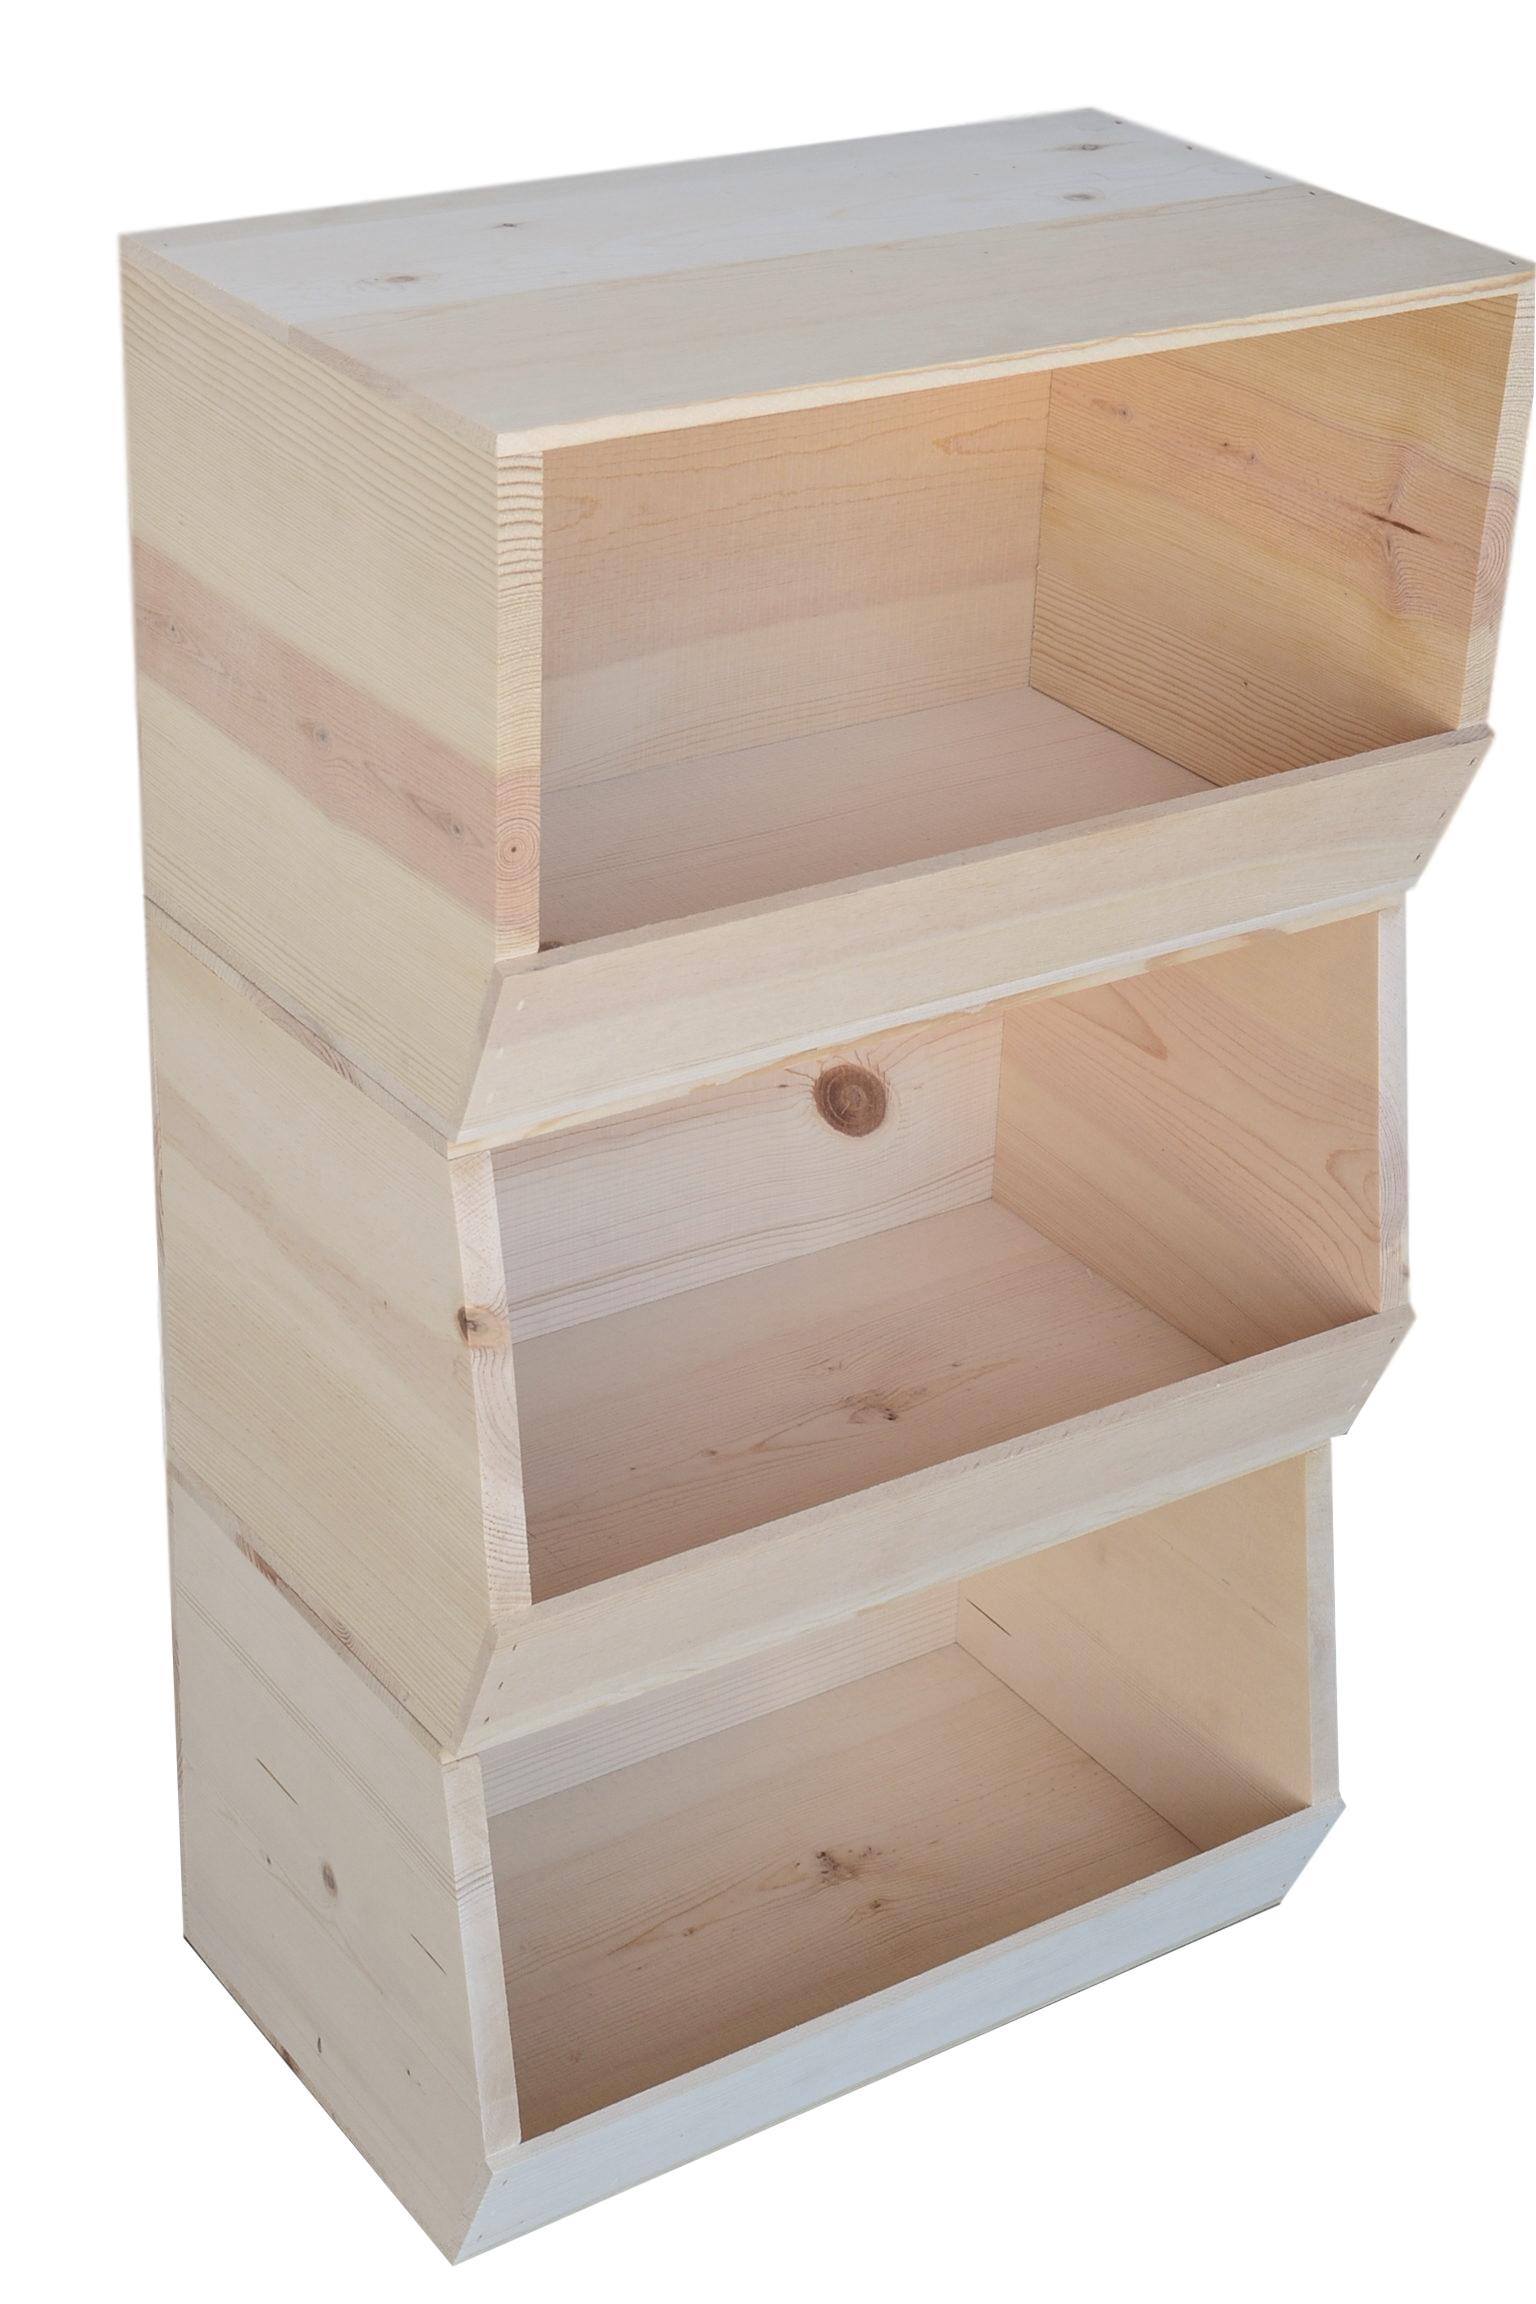 Wooden Stackable Storage Bin Poole, Stacking Wooden Storage Boxes